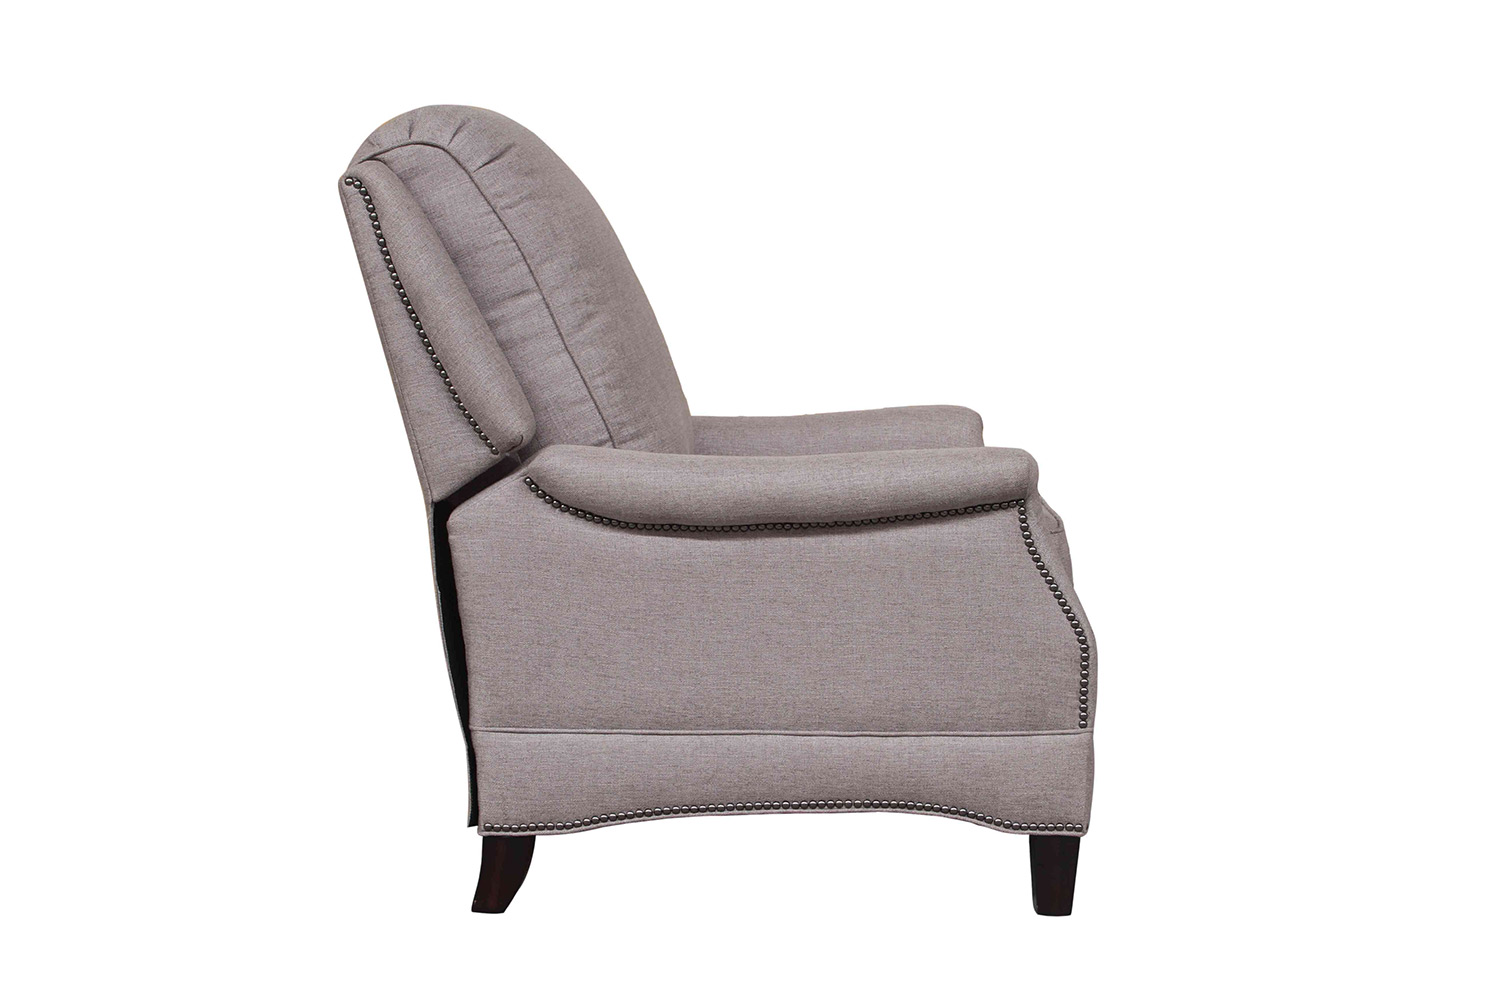 Barcalounger Ashebrooke Recliner Chair - Z-Hory taupe fabric